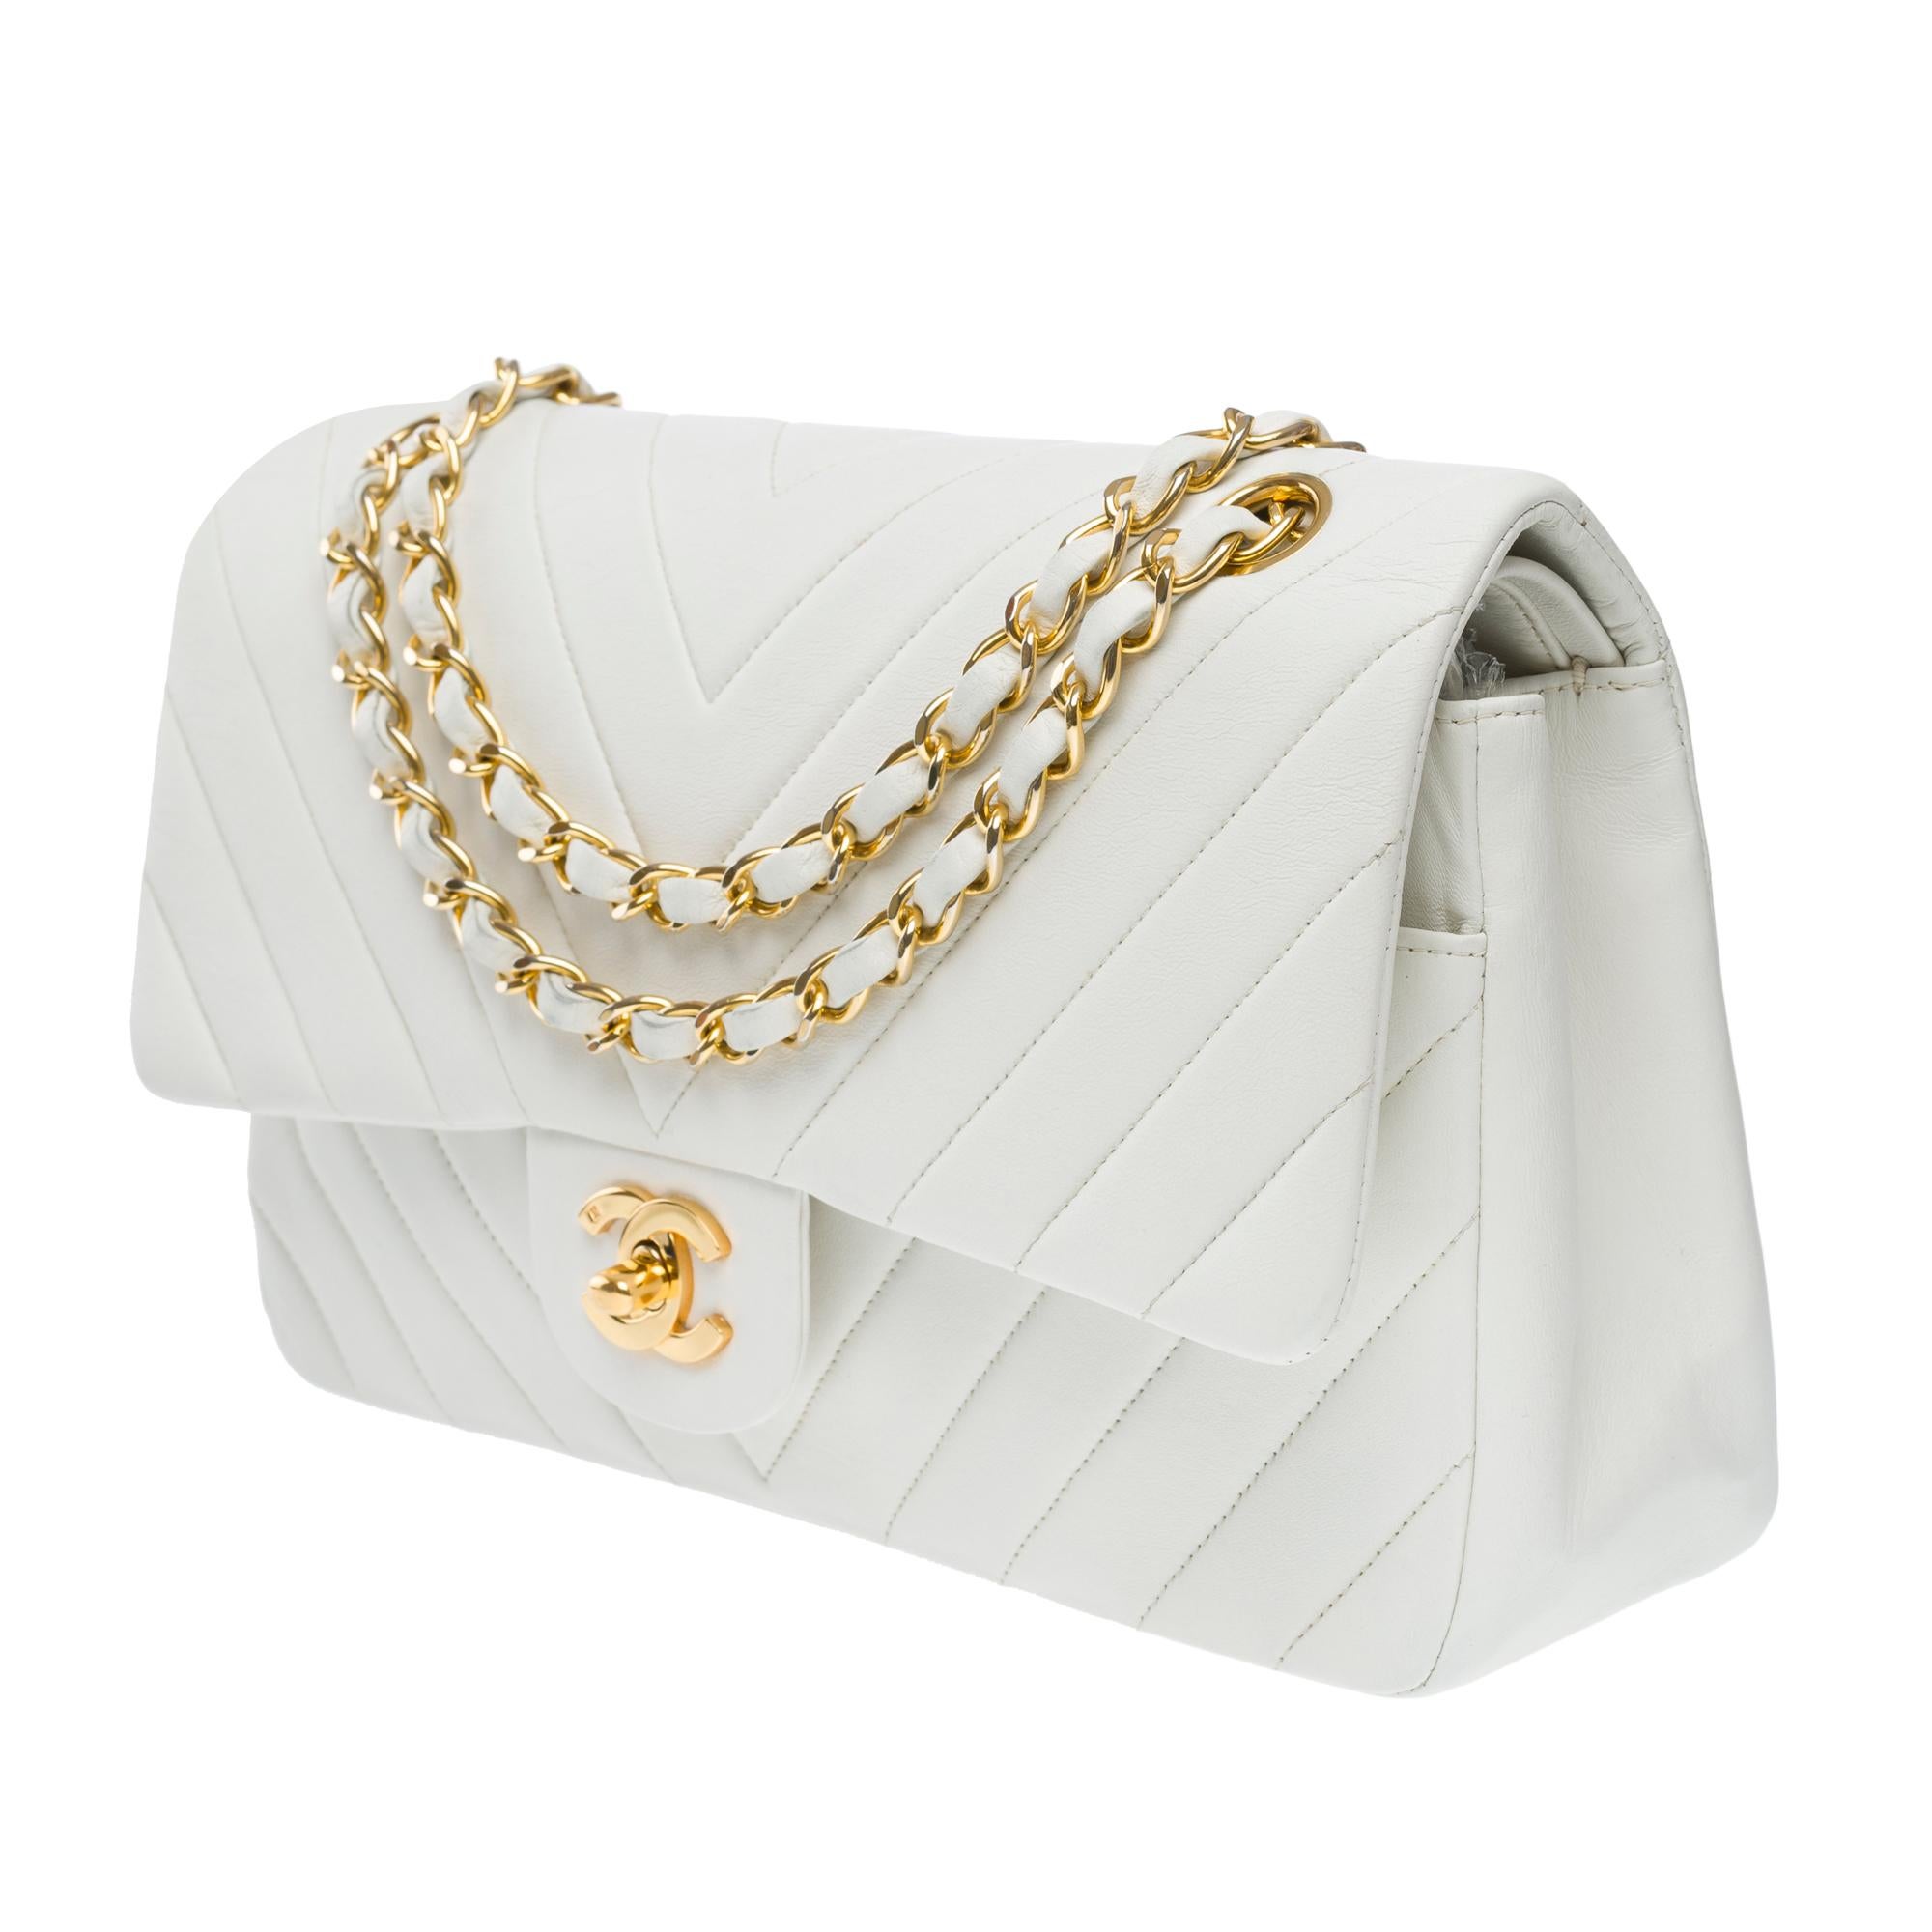 Women's Chanel Timeless double flap shoulder bag in white herringbone quilted lamb, GHW